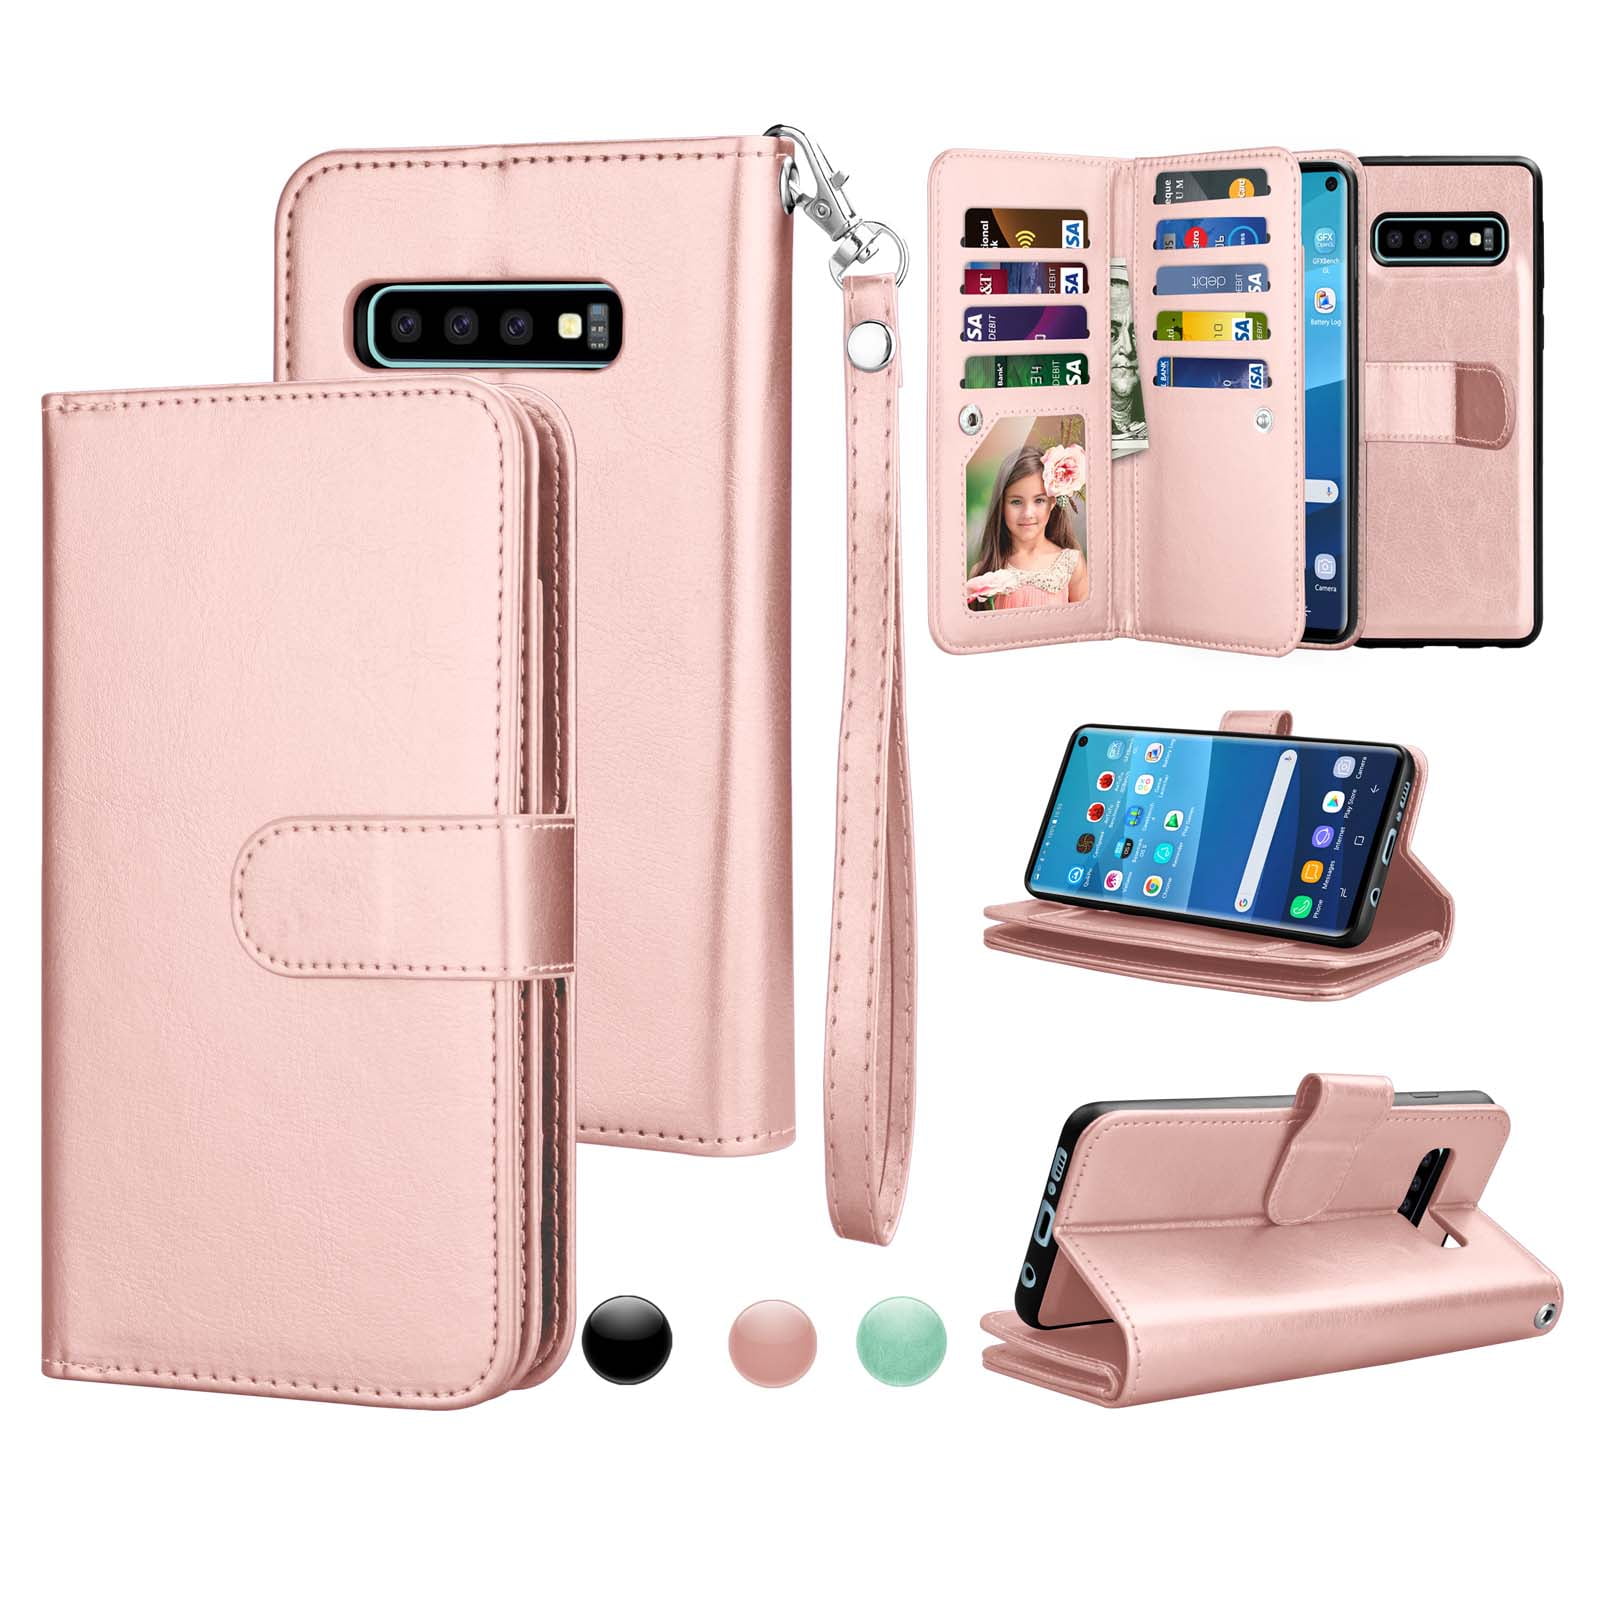 Simple Flip Case Fit for Samsung Galaxy S10 flower2 Leather Cover Wallet for Samsung Galaxy S10 